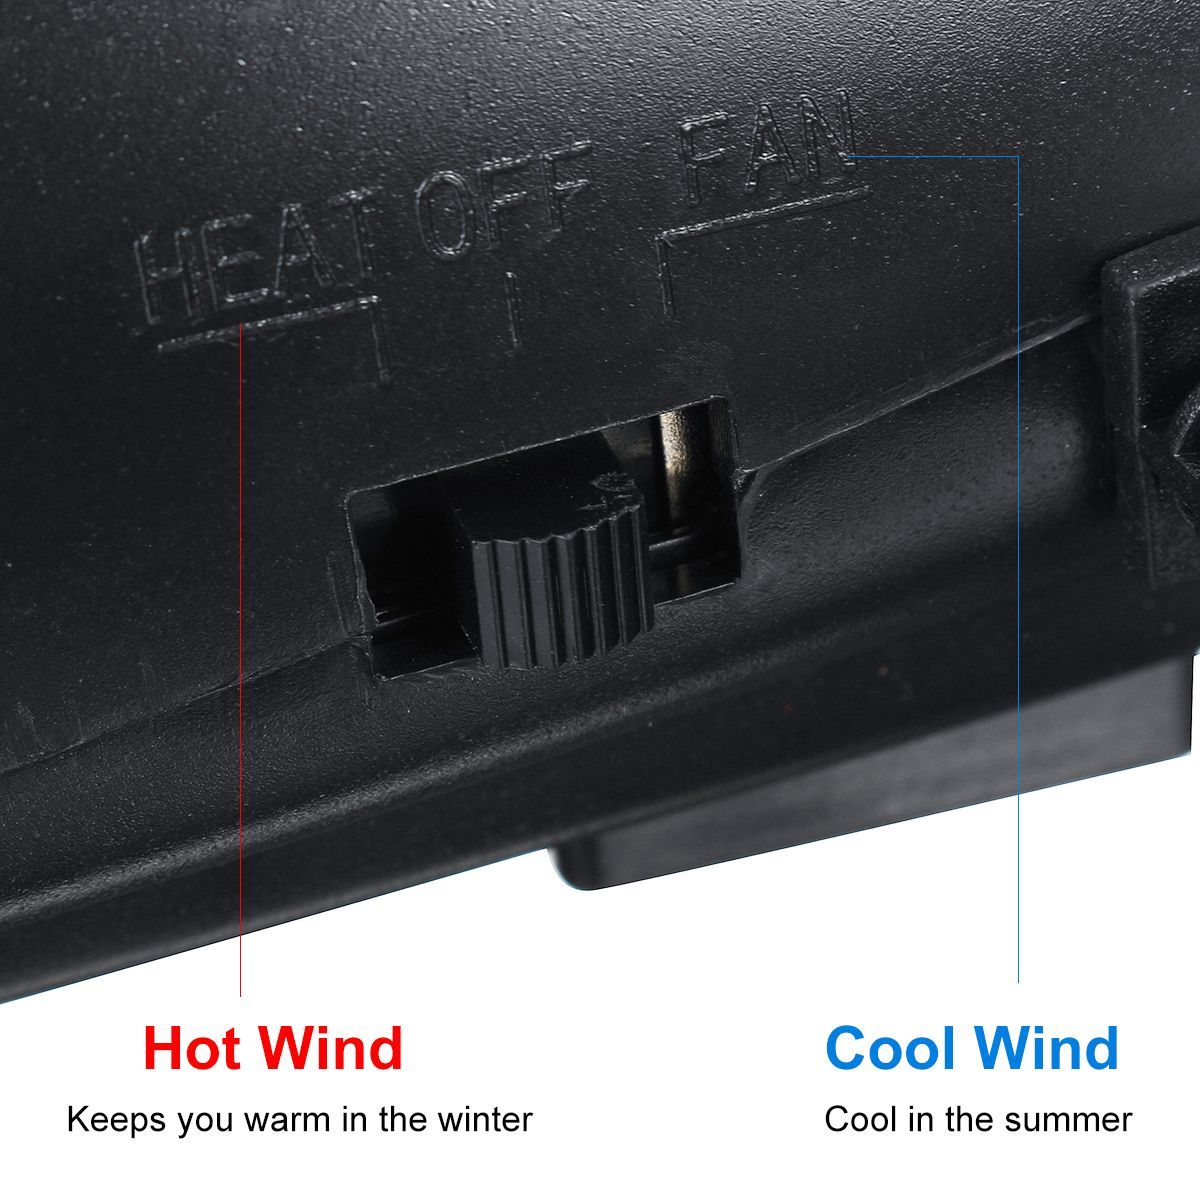 12V-Automobile-Winter-Heating-Fan-Defroster-Multifunctional-Car-Heater-Misting-Device-1749359